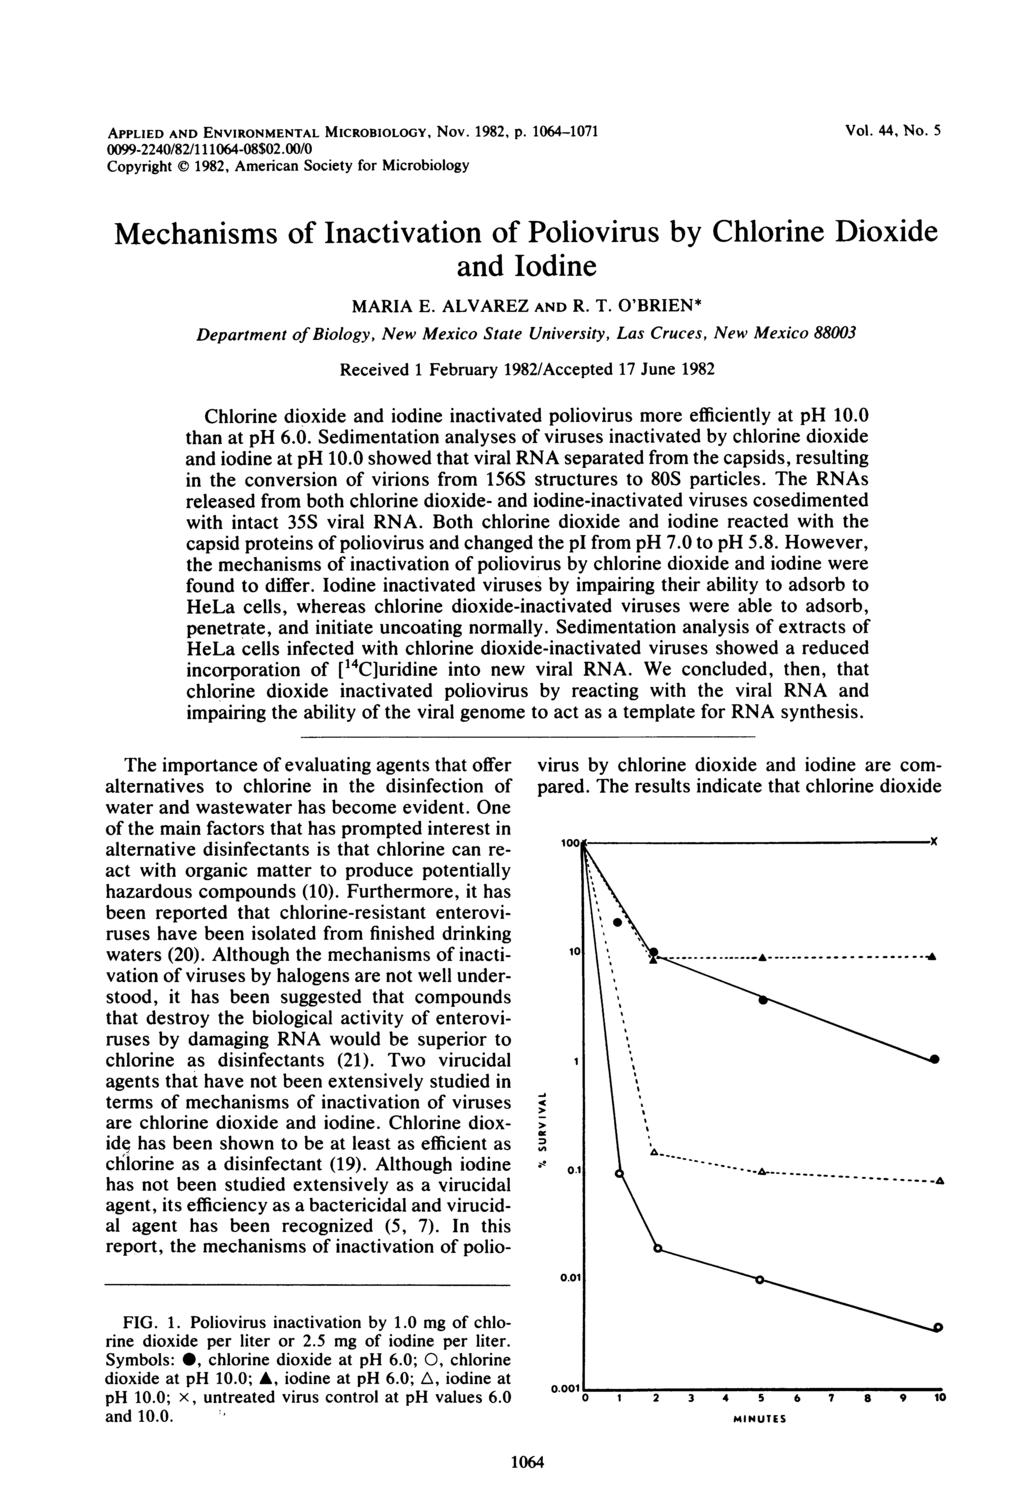 APPLIED AND ENVIRONMENTAL MICROBIOLOGY, Nov. 1982, p. 164-171 99-224/82/11164-8$2./ Copyright 1982, American Society for Microbiology Vol. 44, No.